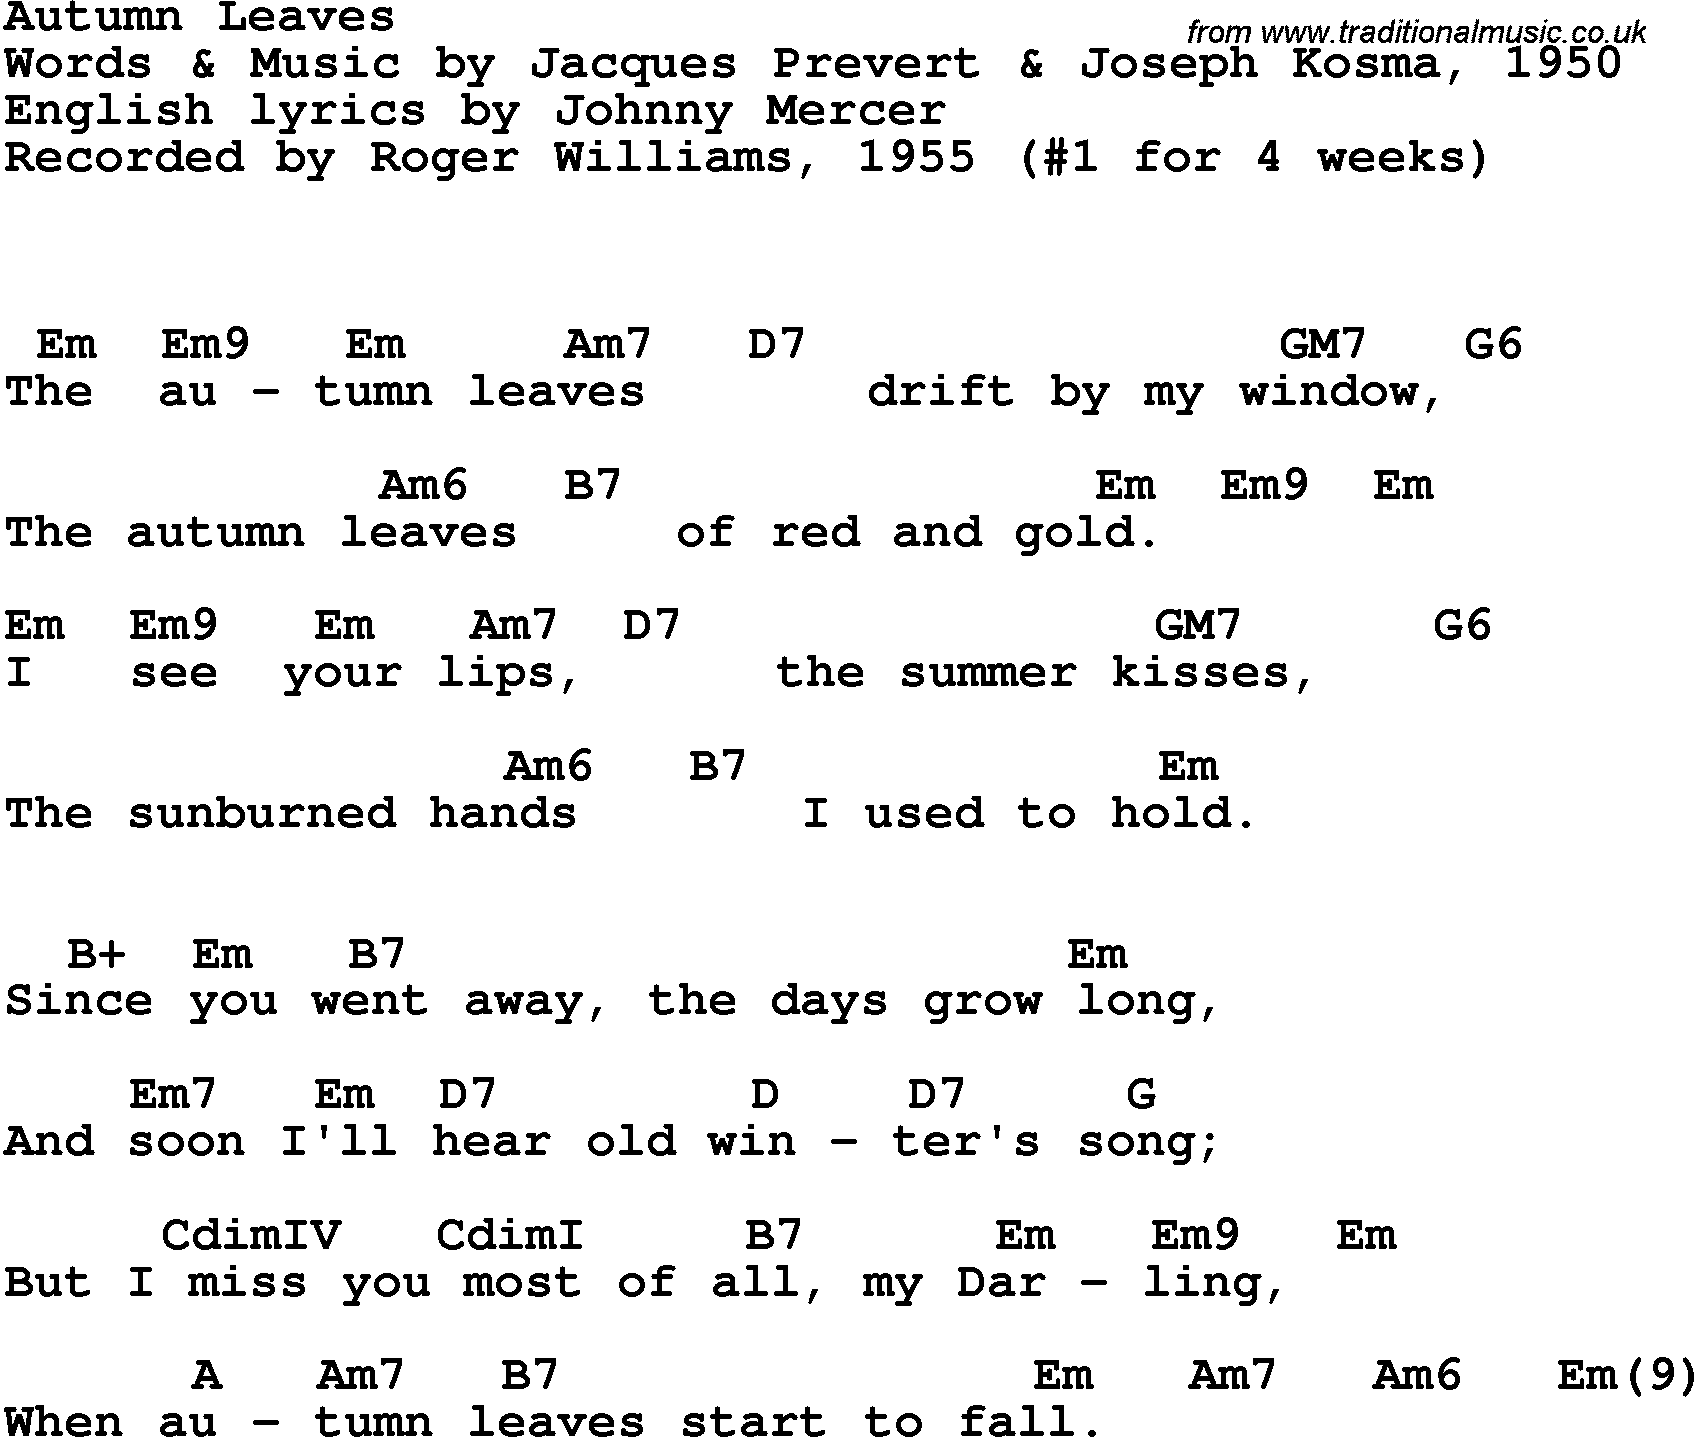 Song Lyrics with guitar chords for Autumn Leaves - Roger Williams, 1955